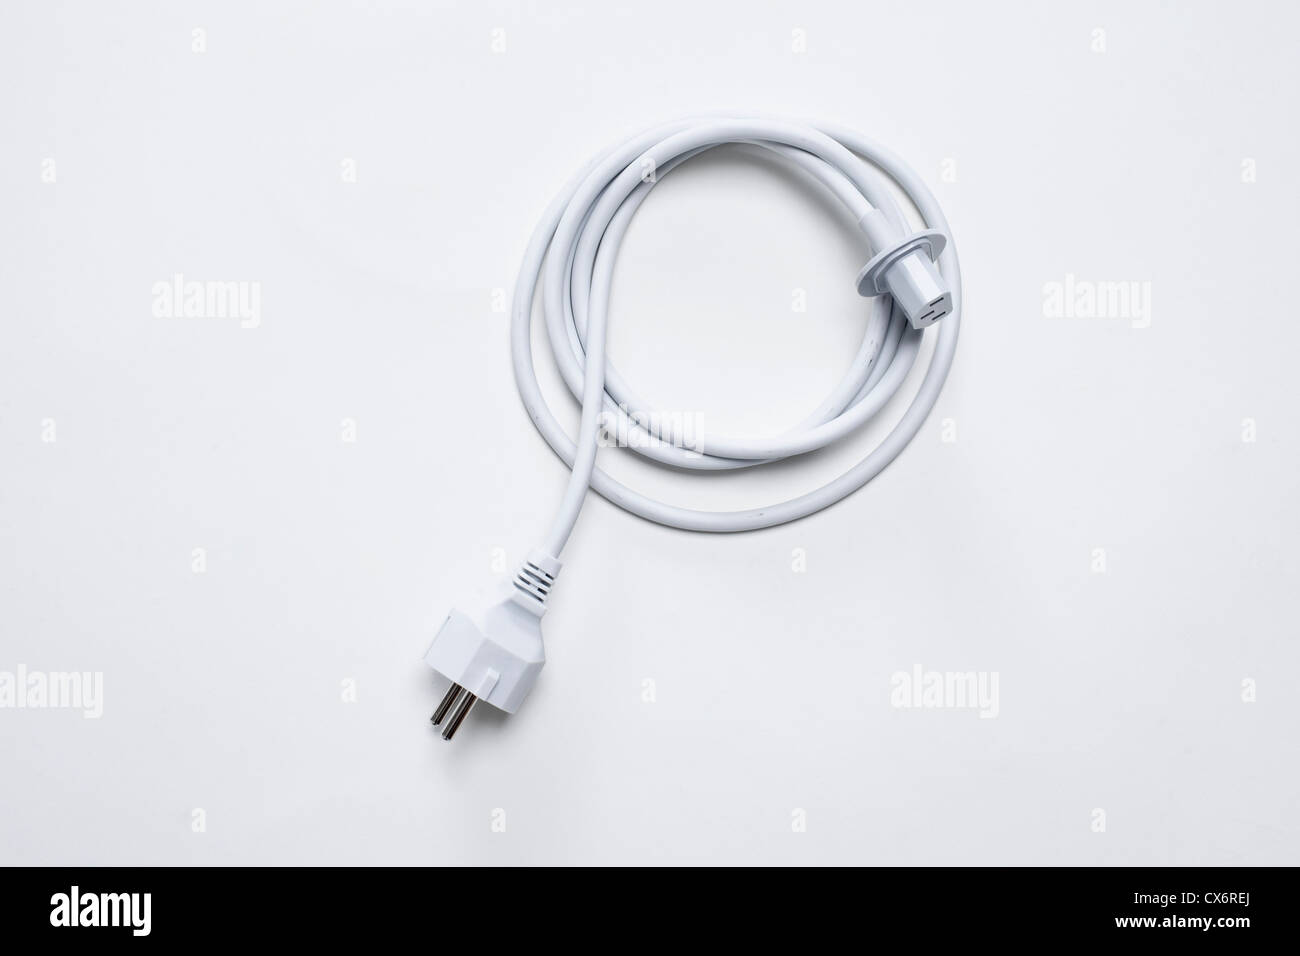 A German power cord for a computer Stock Photo